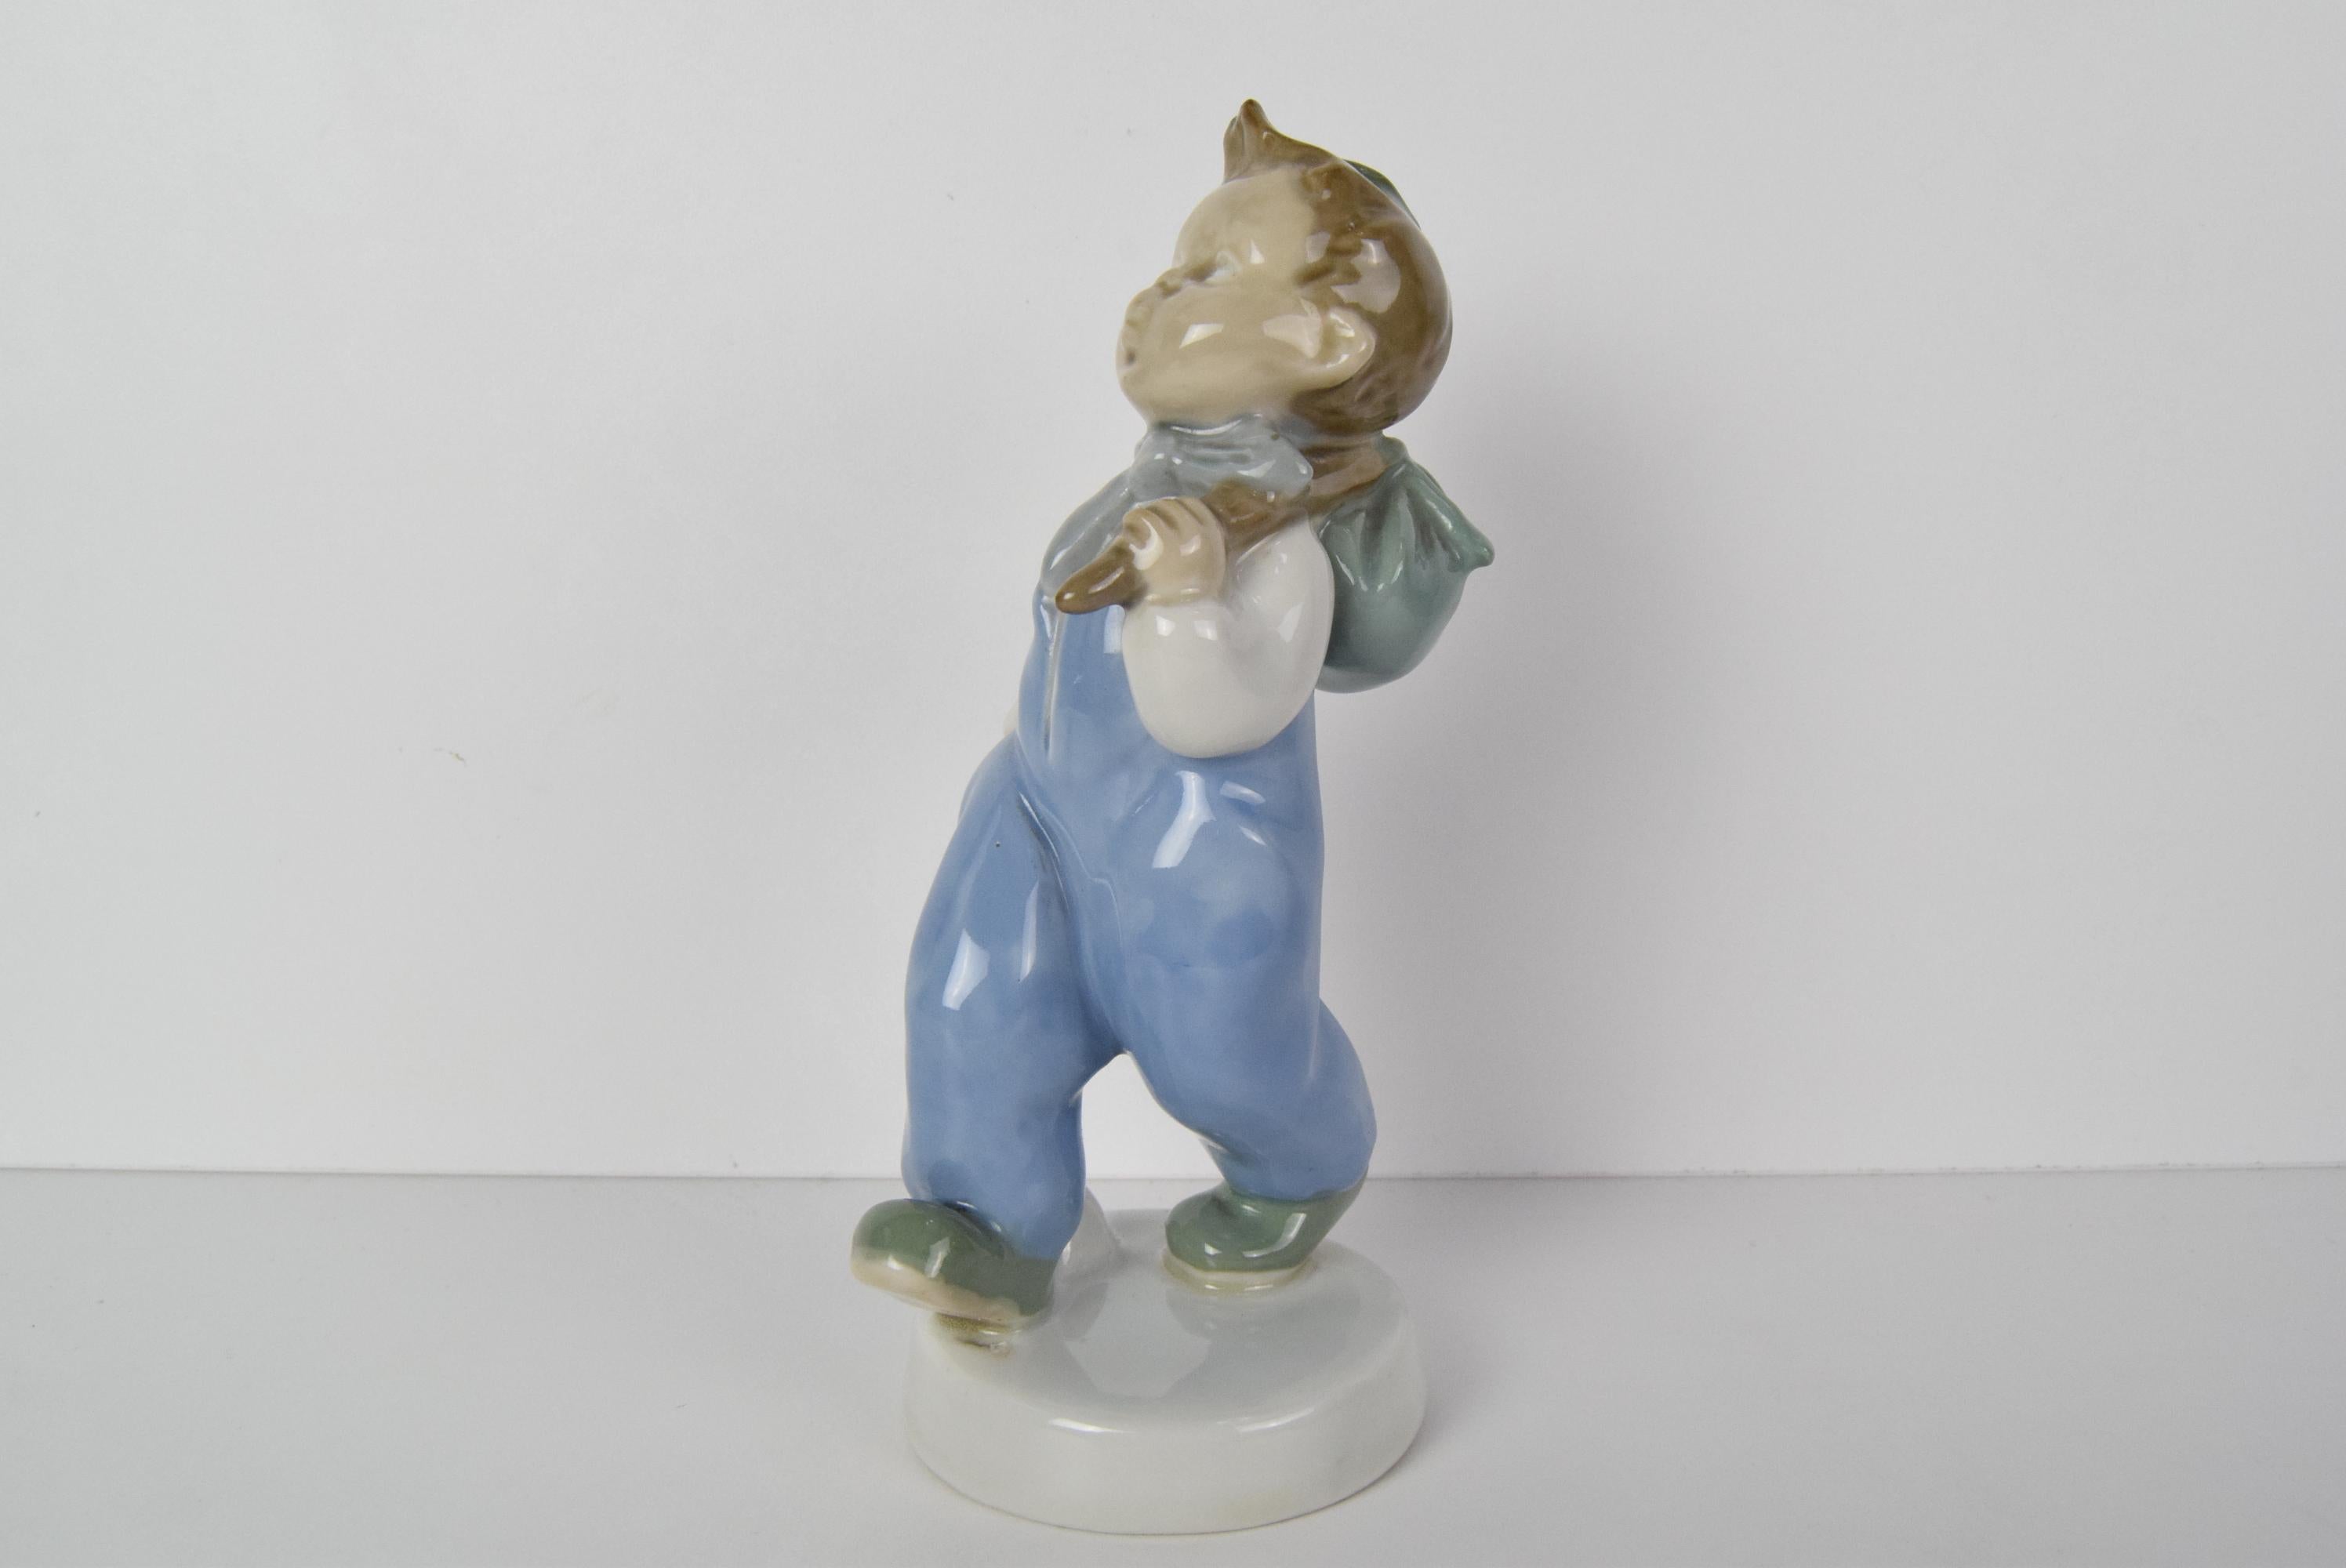 
A little tramp with a dog in a knot
Designed by artist Elly Strobach König (1908-2002)
for the ROYAL DUX Duchcov porcelain factory
Good condition